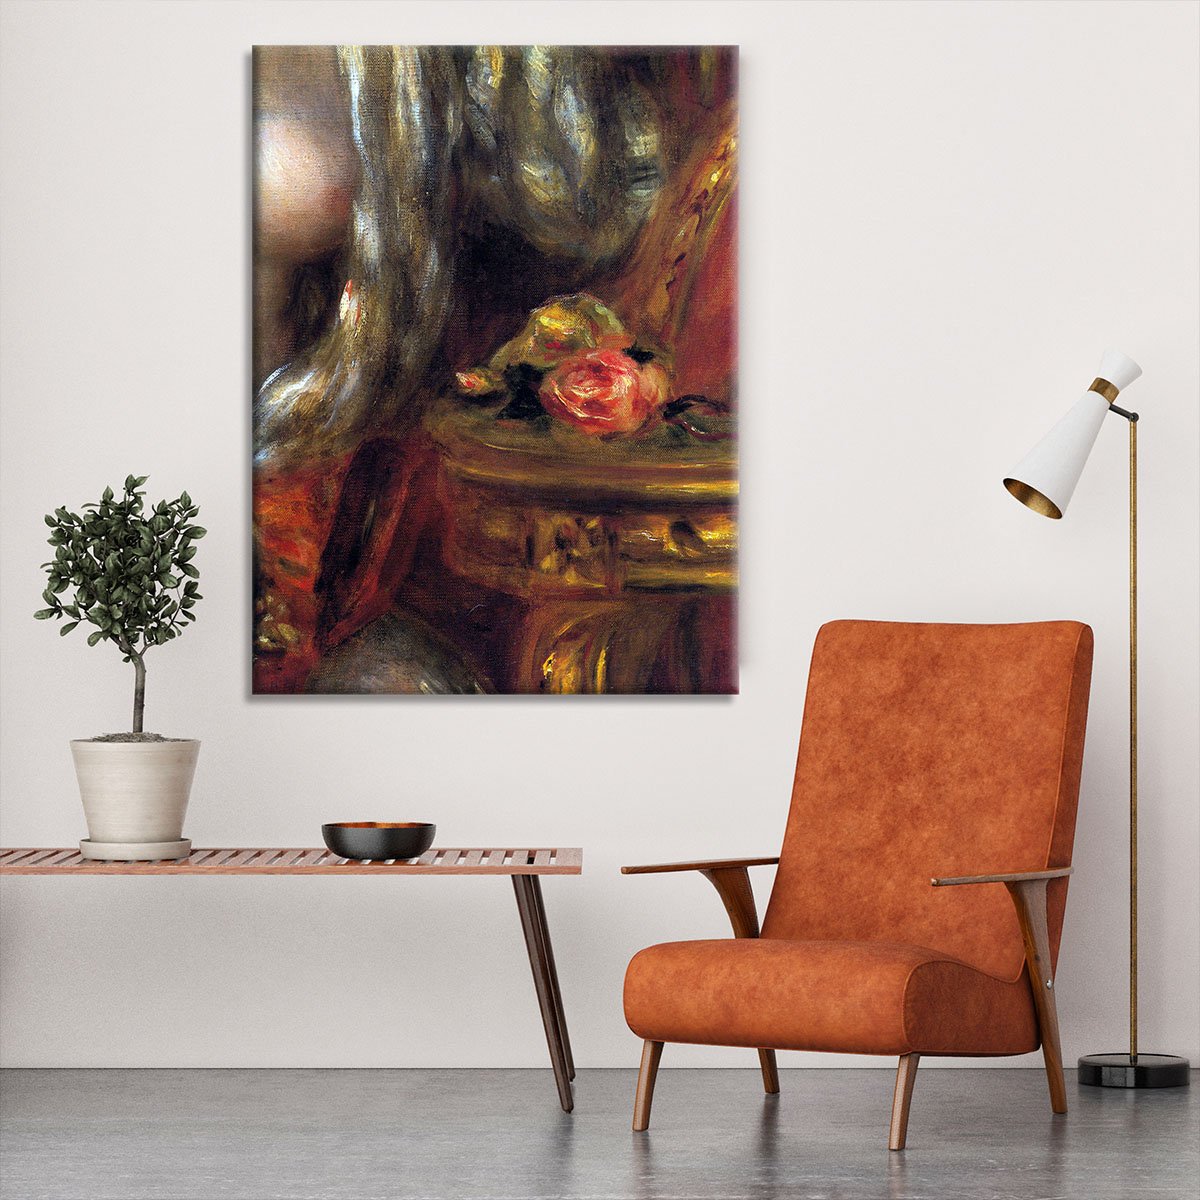 Gabrielle with jewels detail by Renoir Canvas Print or Poster